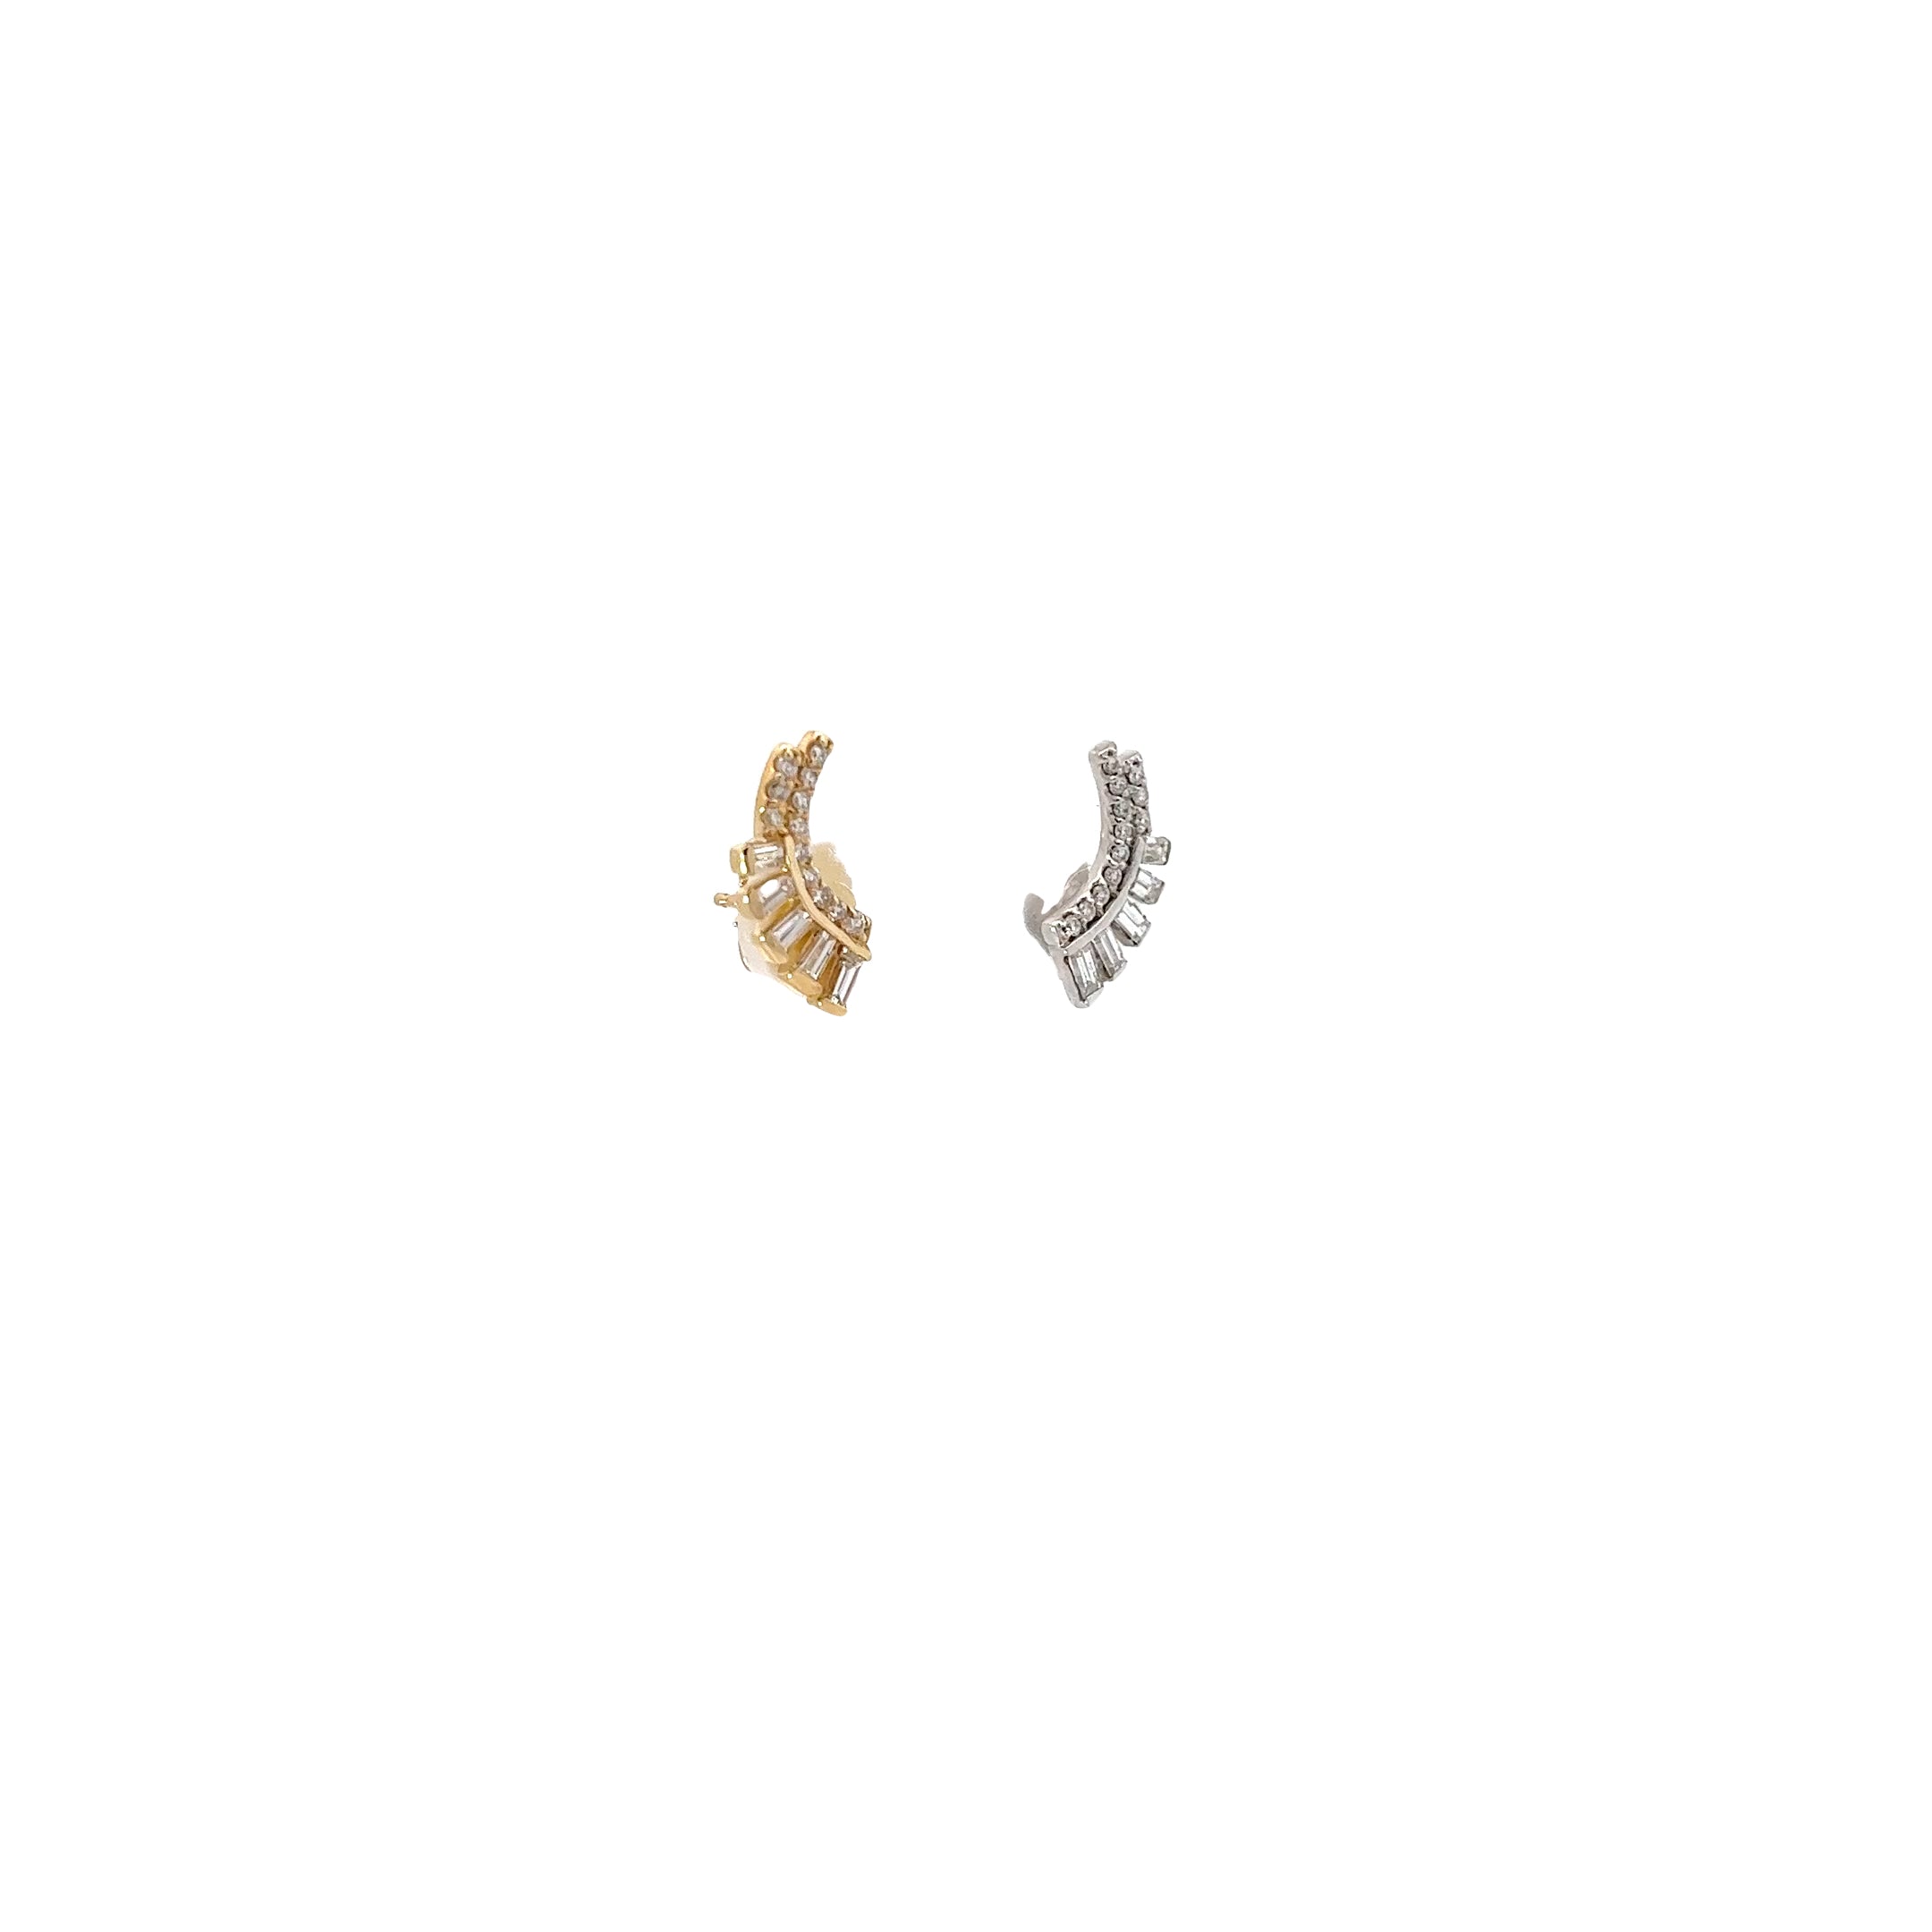 14K .50CT GVS2  BAGUETTE AND ROUND DIAMOND CLIMBERS